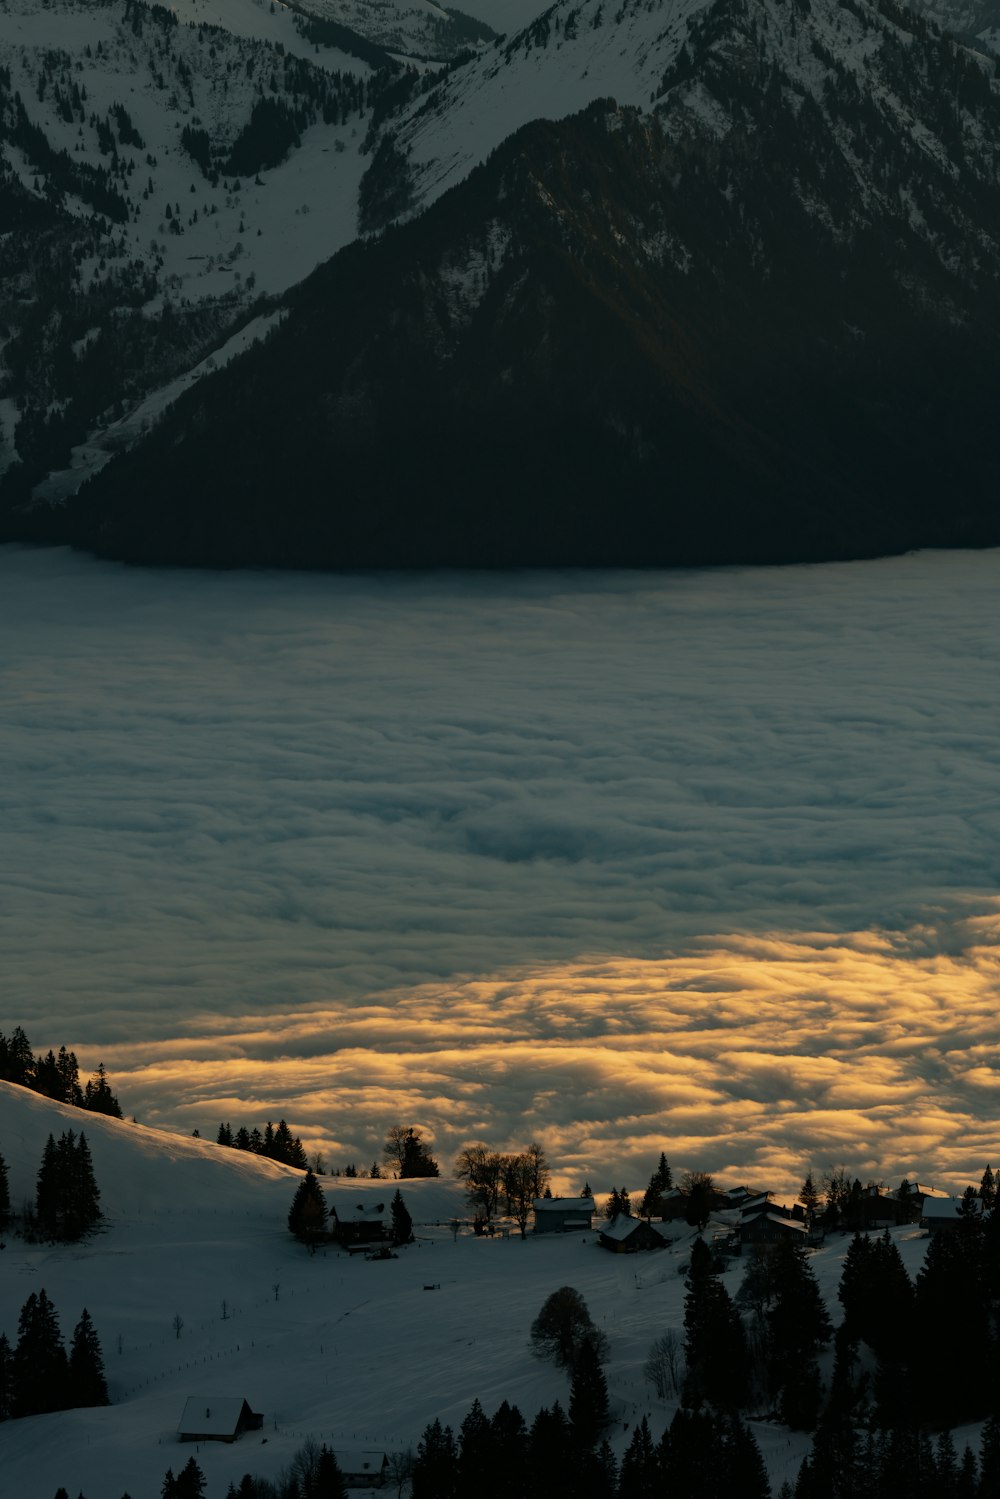 a view of a mountain range covered in clouds